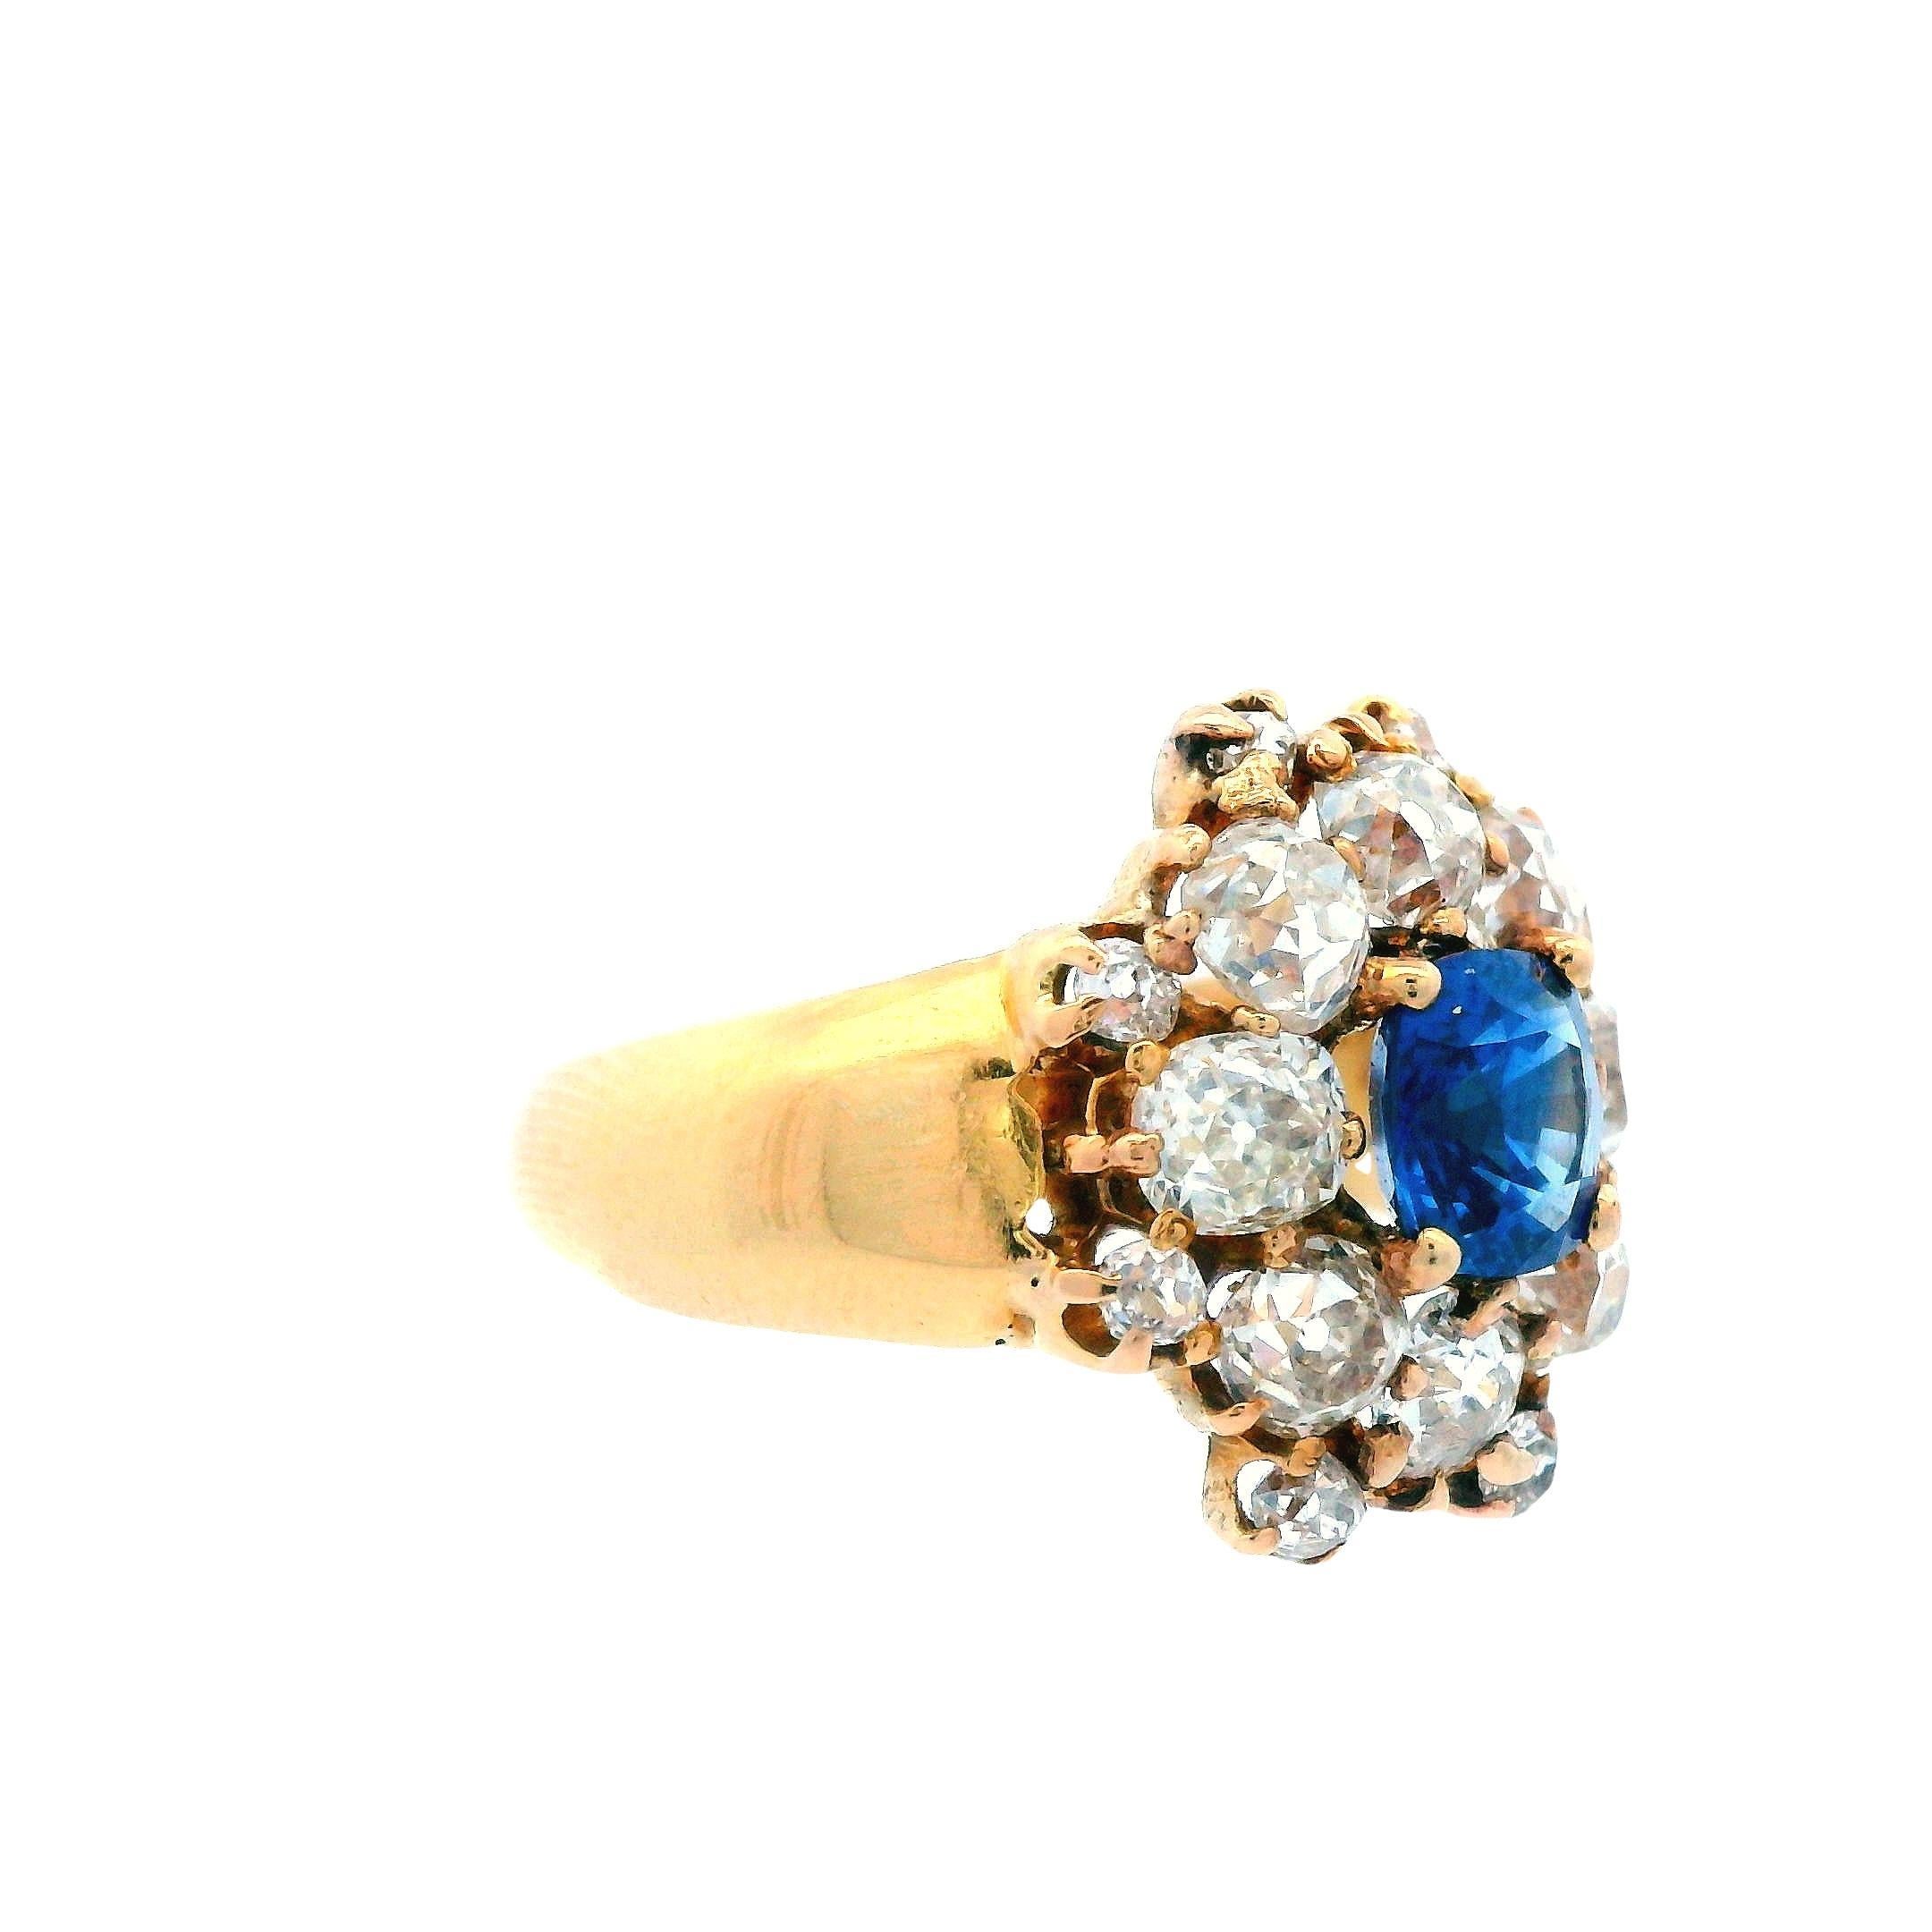 This ring boasts a brilliant, deep blue natural colored sapphire at its center that is nearly one carat! The center stone is cushion cut and such a rich blue that even in the soft evening light, it boasts royal blue depth! The sapphire is surrounded